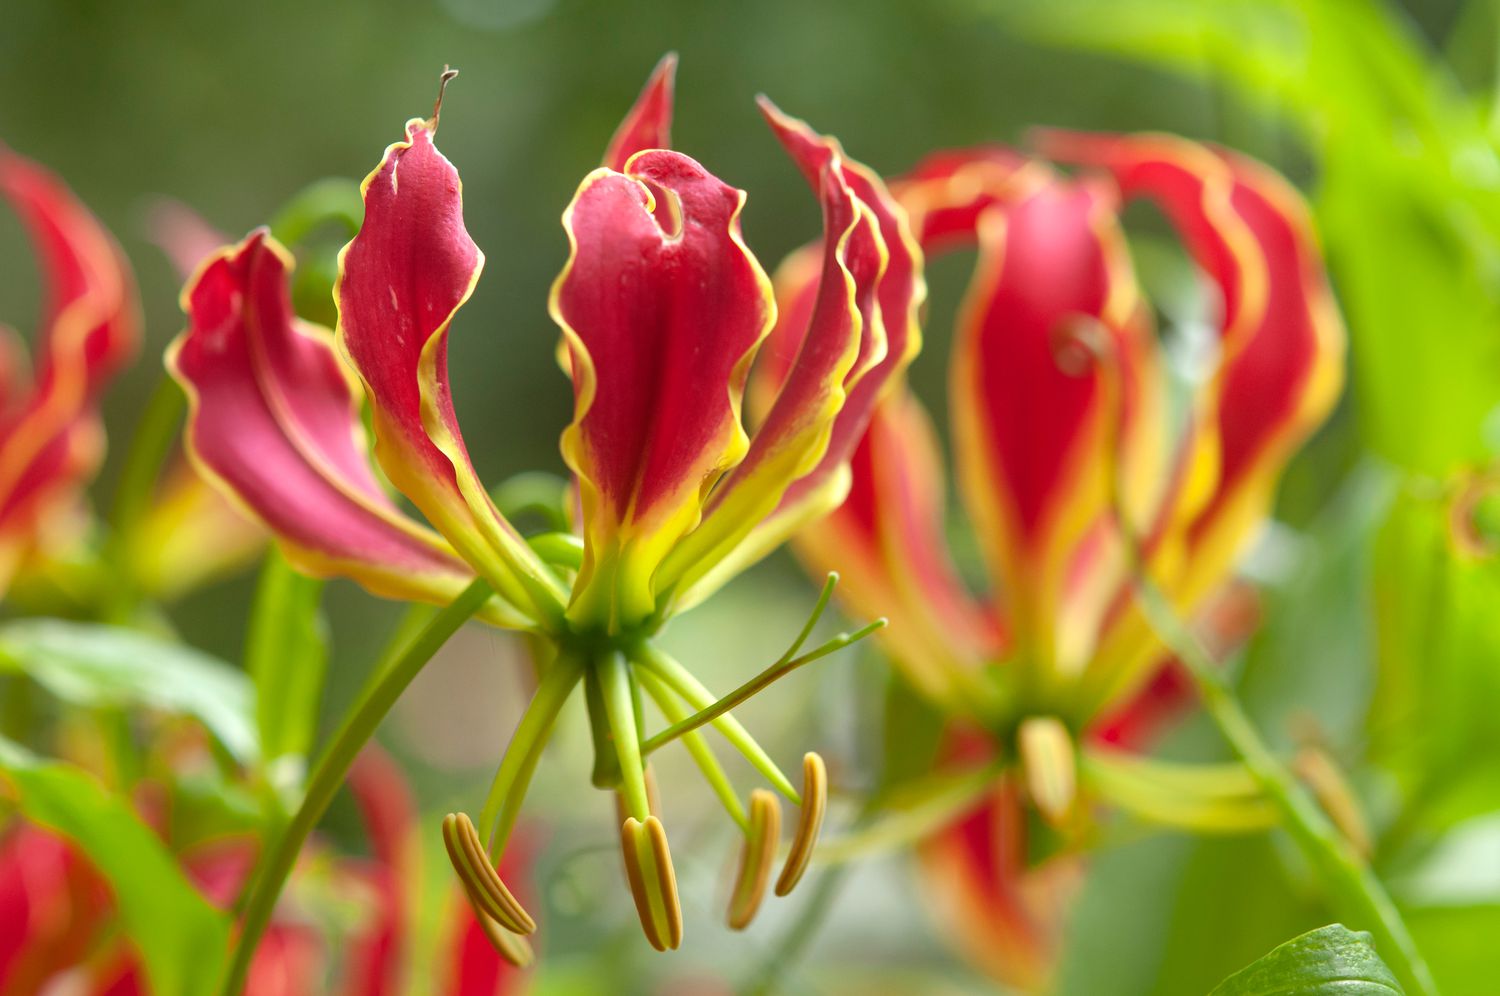 African Flame Lily flowers that start with a